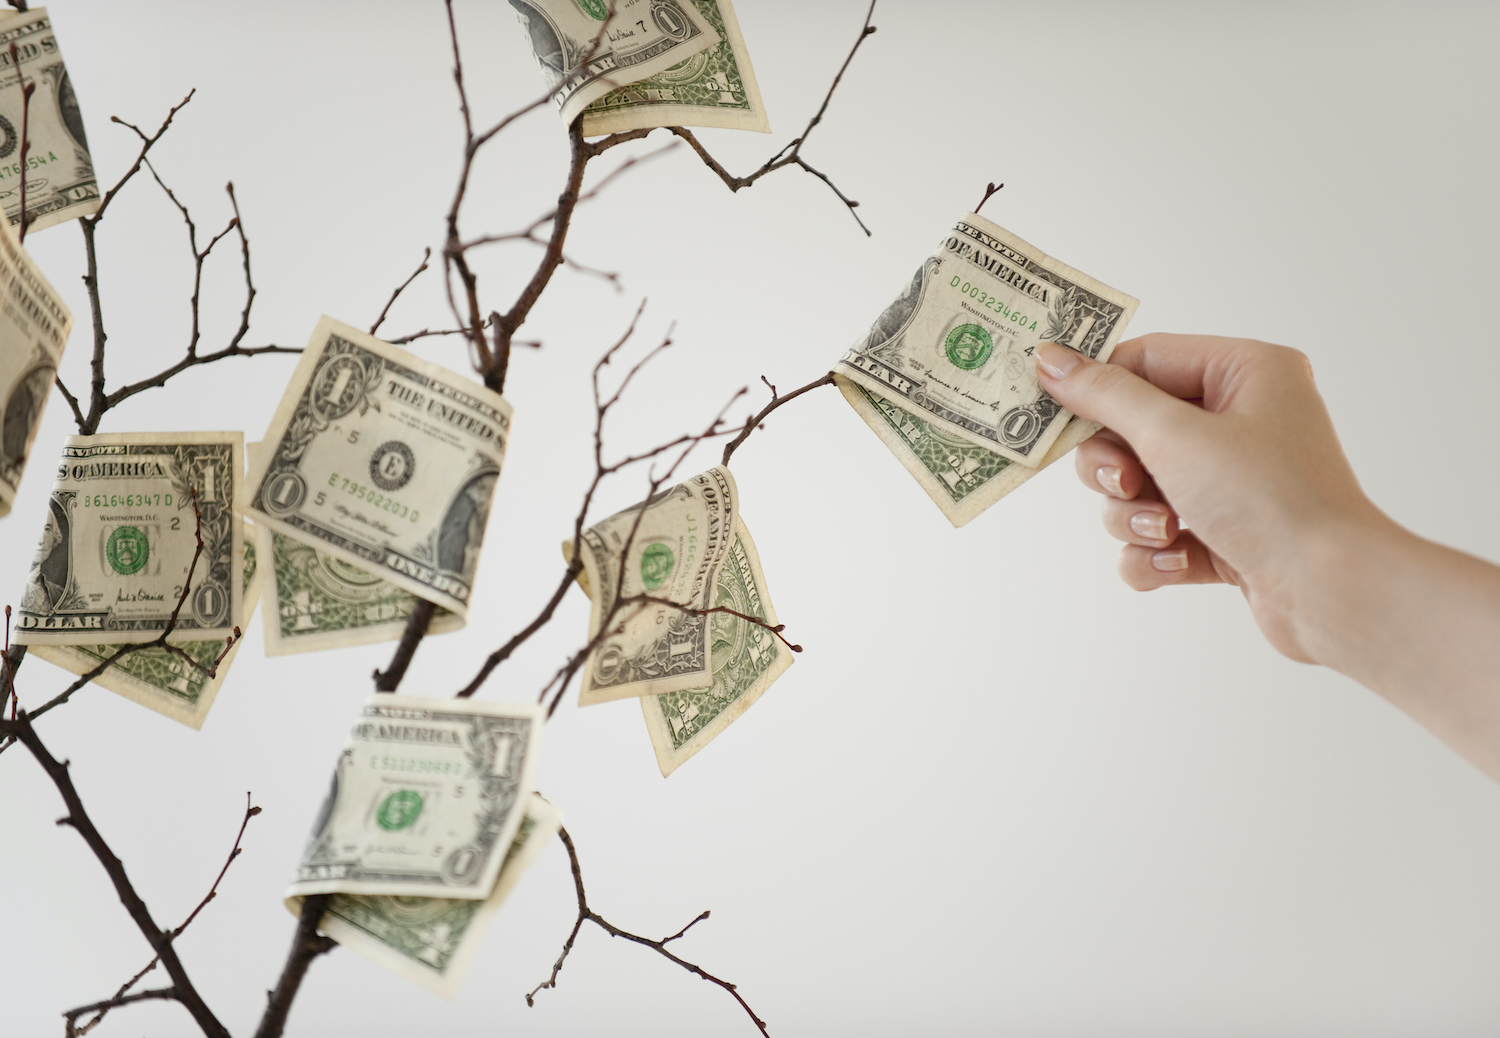 Money tree: an adult hand reaches for dollar bills growing on a leafless tree